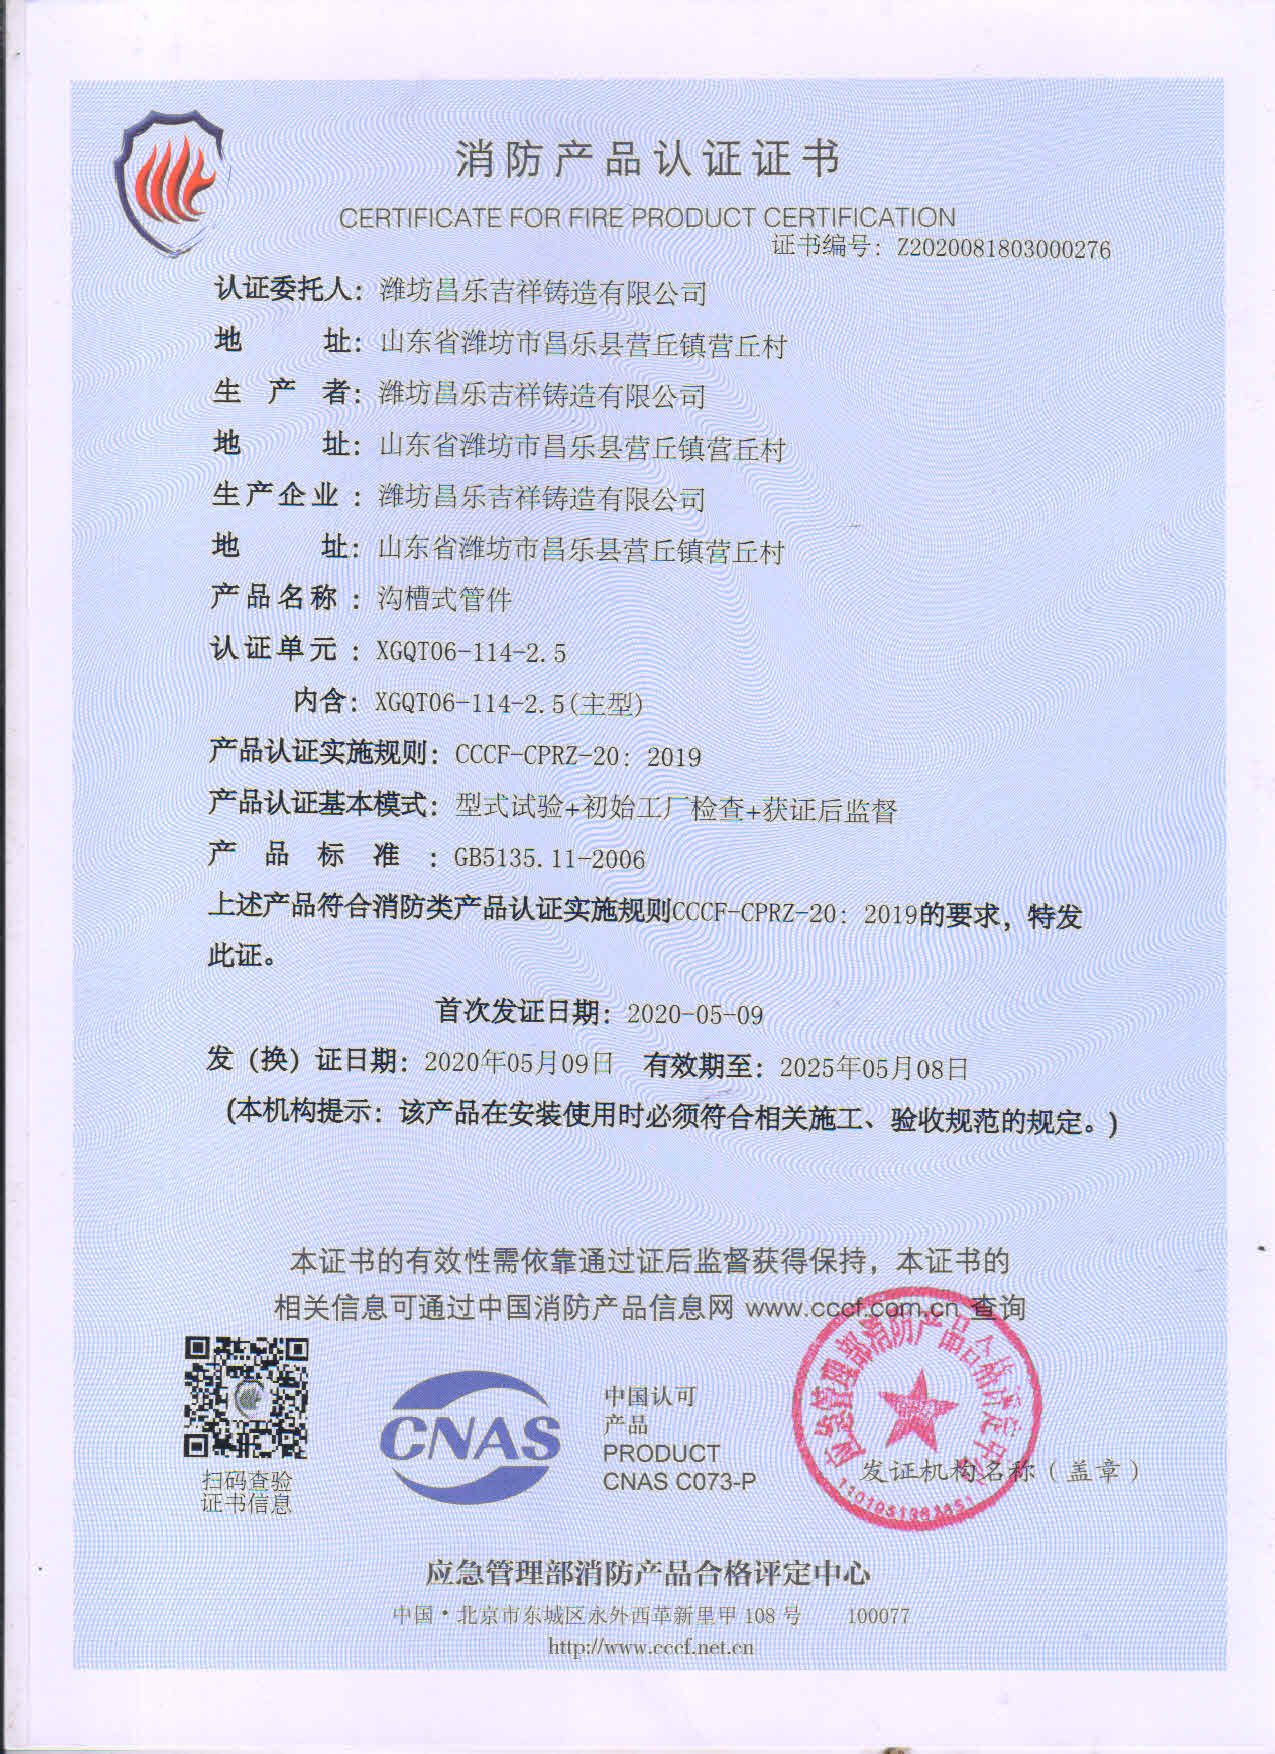 Certificate for the Fire Product Certification 